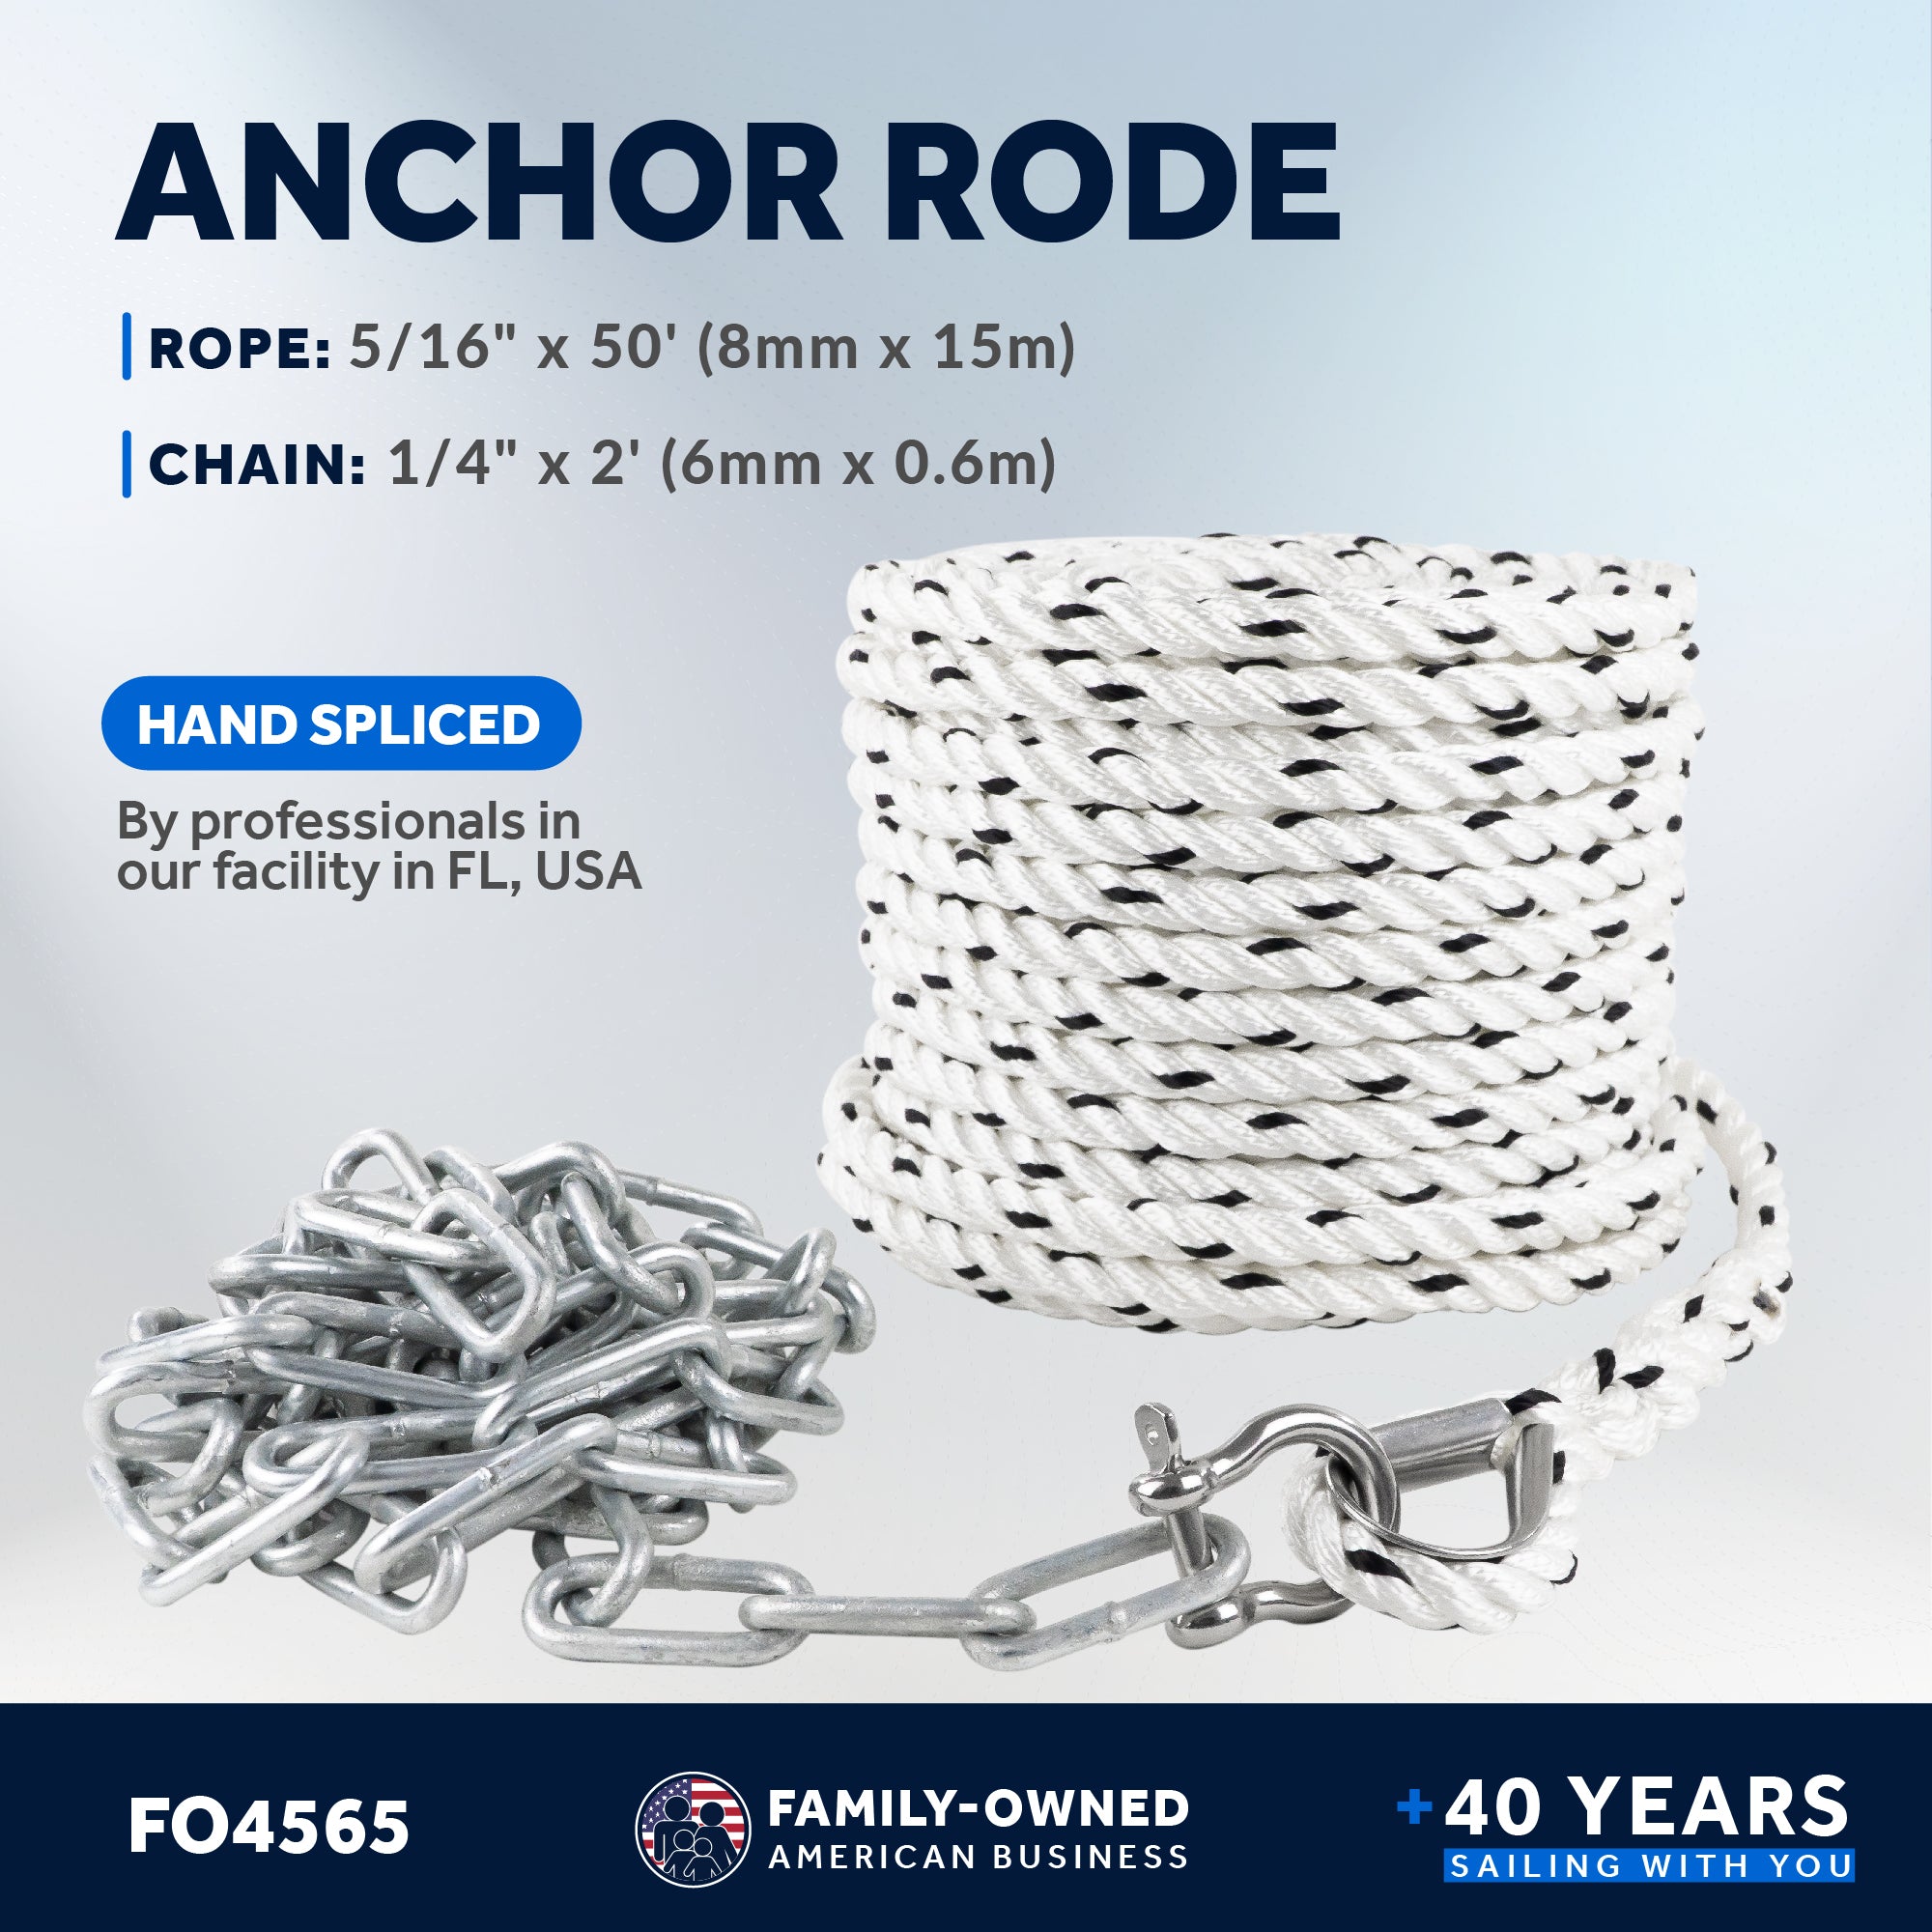 Anchor Rode, 5/16" x 50' Nylon 3-Strand Rope, 1/4" x 2' Hot Dipped Galvanized Steel Chain - FO4565